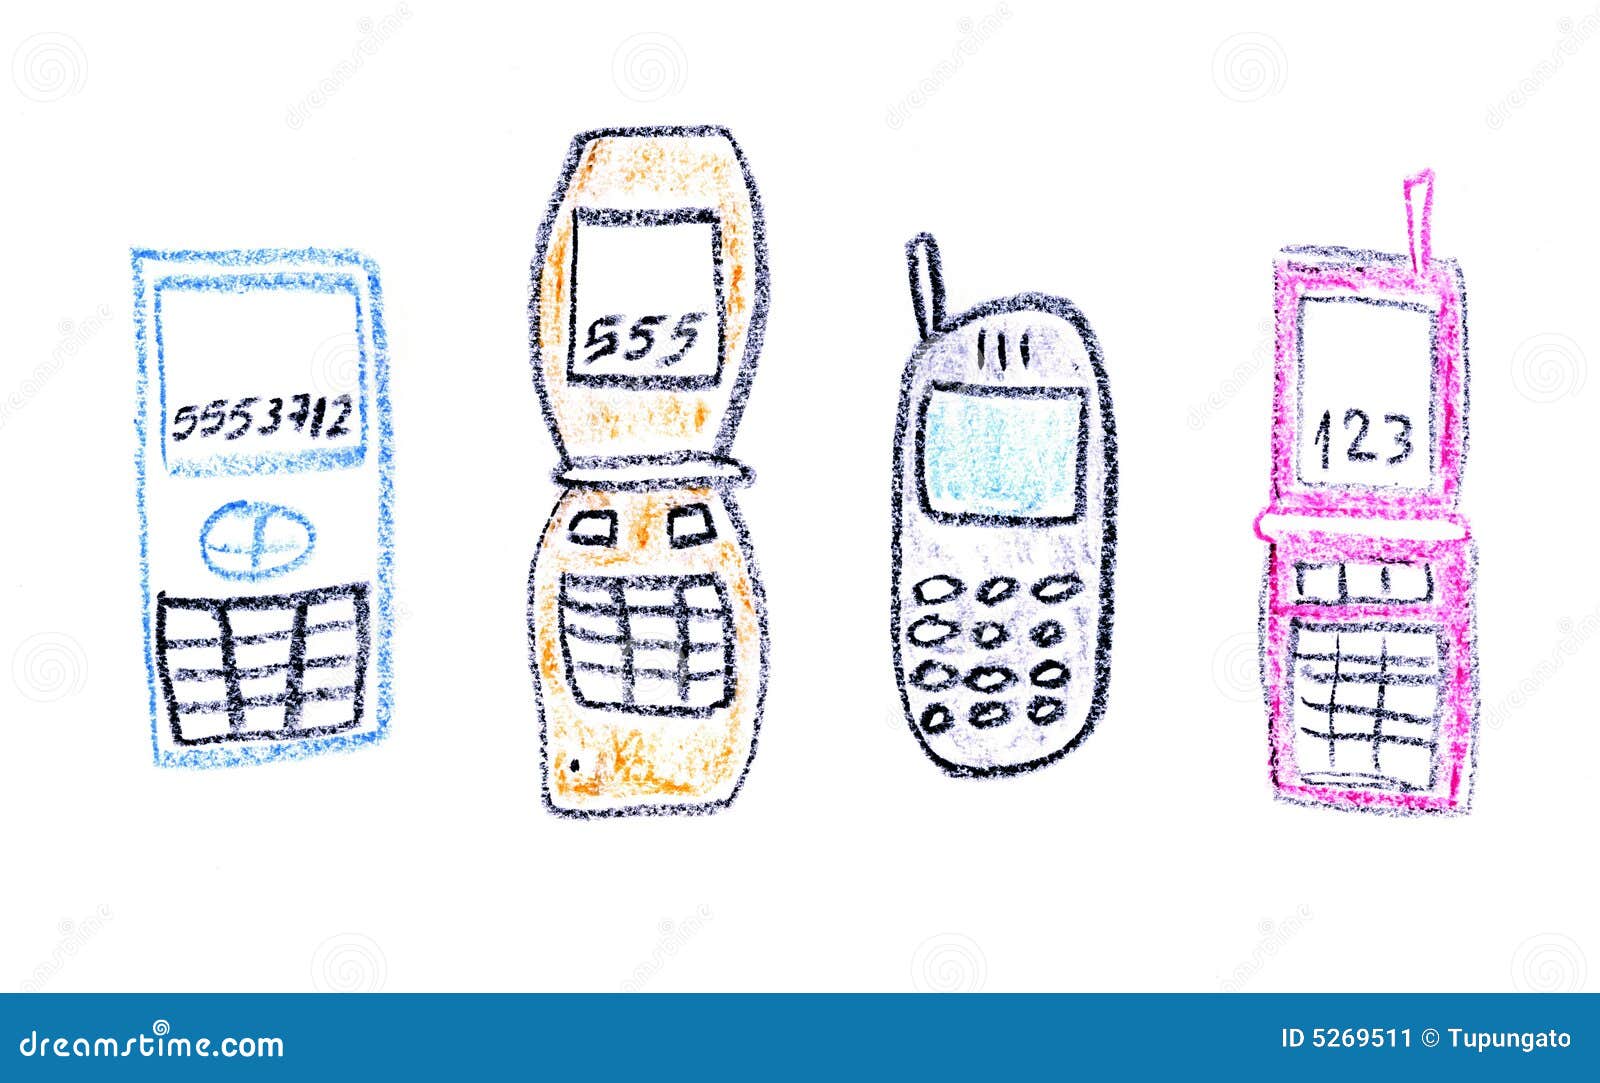 Cell Phones Stock Image - Image: 5269511